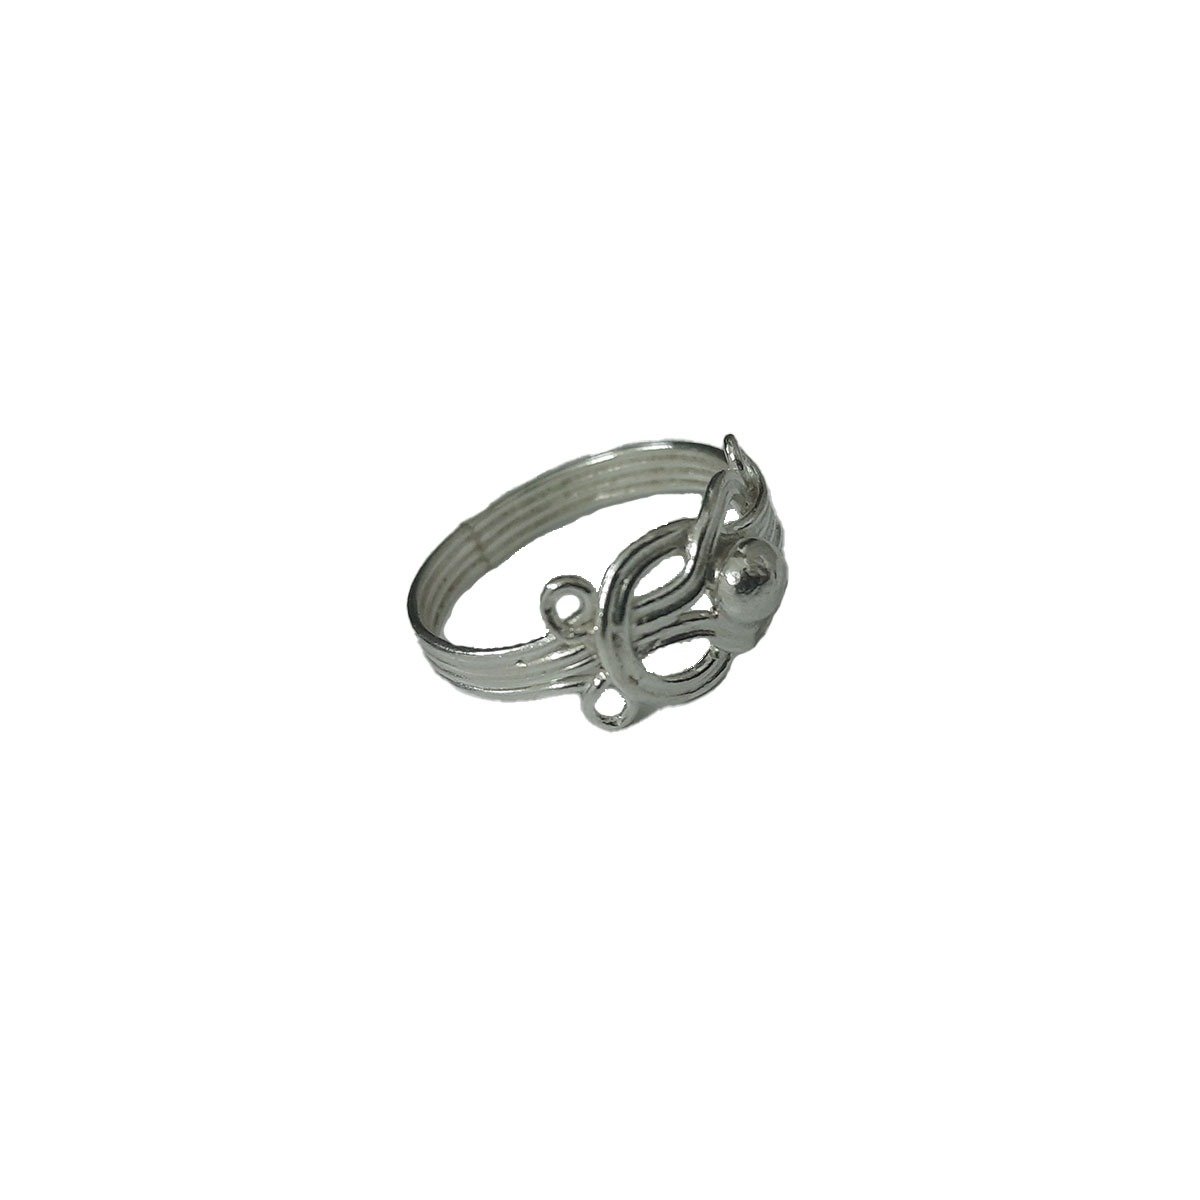 SILVER PAVITHRAM RING FOR HINDU RITES